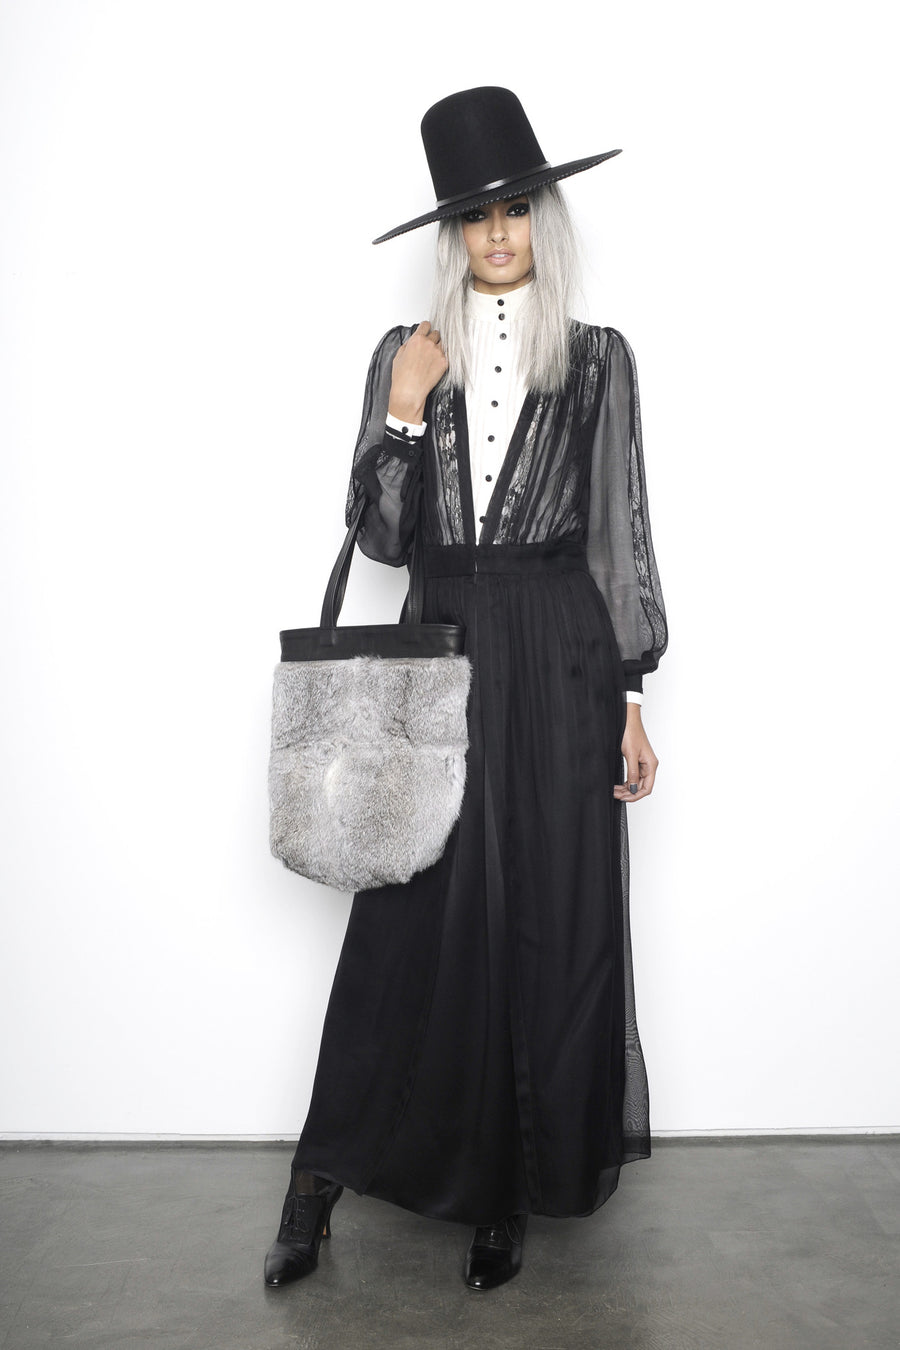 Gizele Oliveira IMG Model Gray Grey One of a Kind Rabbit Fur Tote Black Leather Wendy Nichol Luxury Handbag Purse Bag Designer handmade in NYC New York City one of a kind Durable Handle strap Interior Pocket High Quality Leather AW15 Queen of Thieves